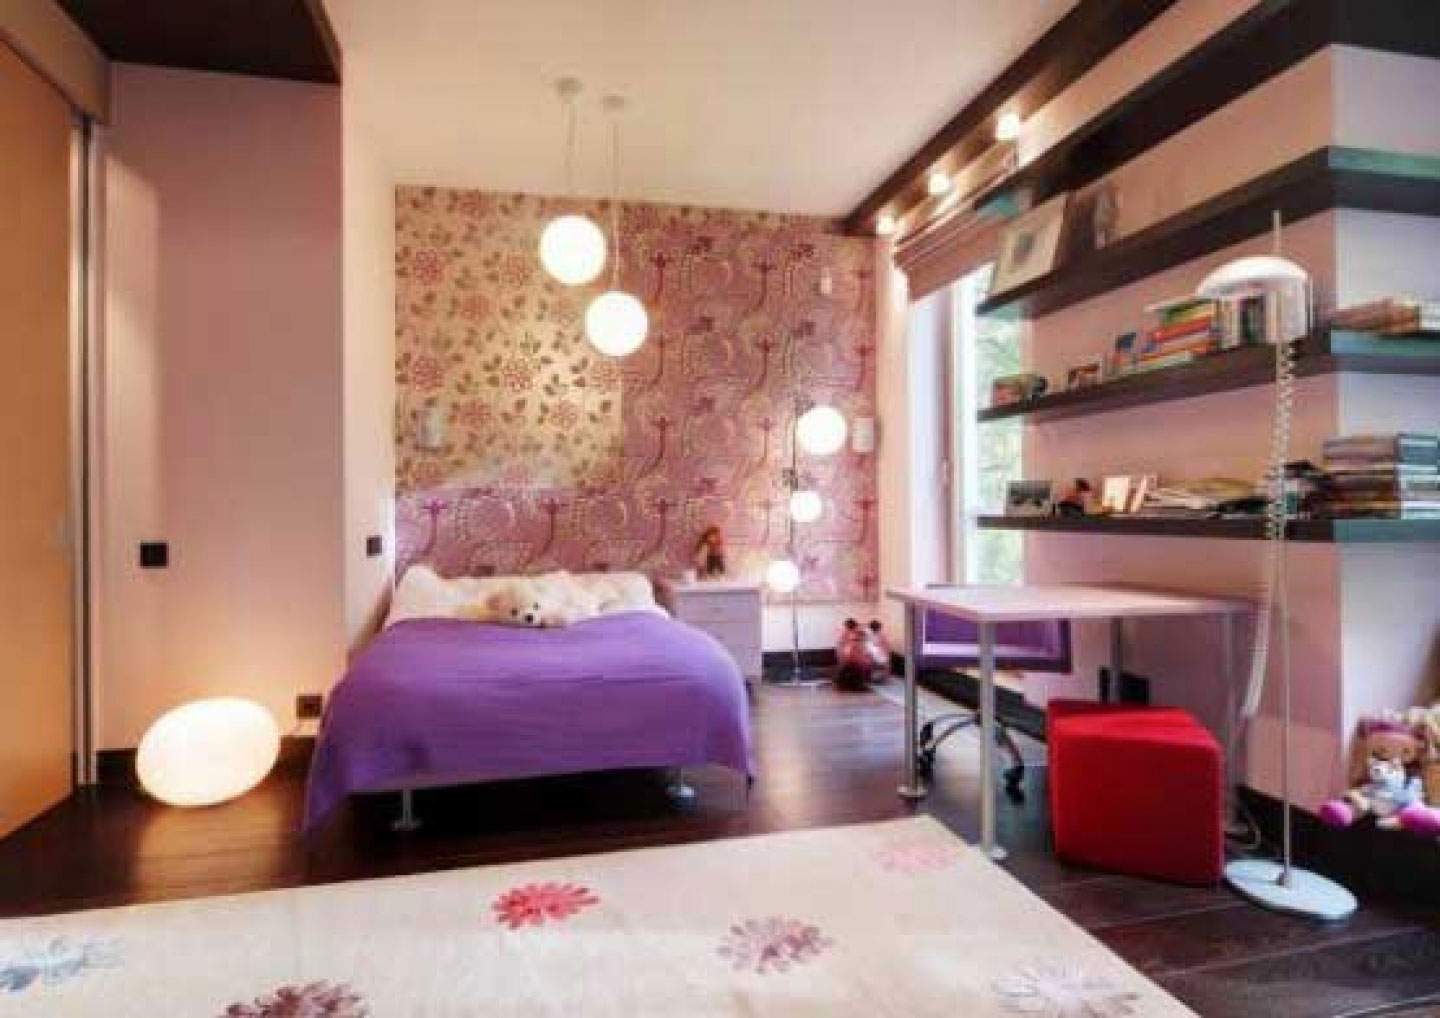 And Wonderful For Comfortable And Wonderful Bedroom Design For Young Women With Purple Linen And Simple Wall Shelving Bedroom  Bedroom Ideas For Young Women In Modern Design 